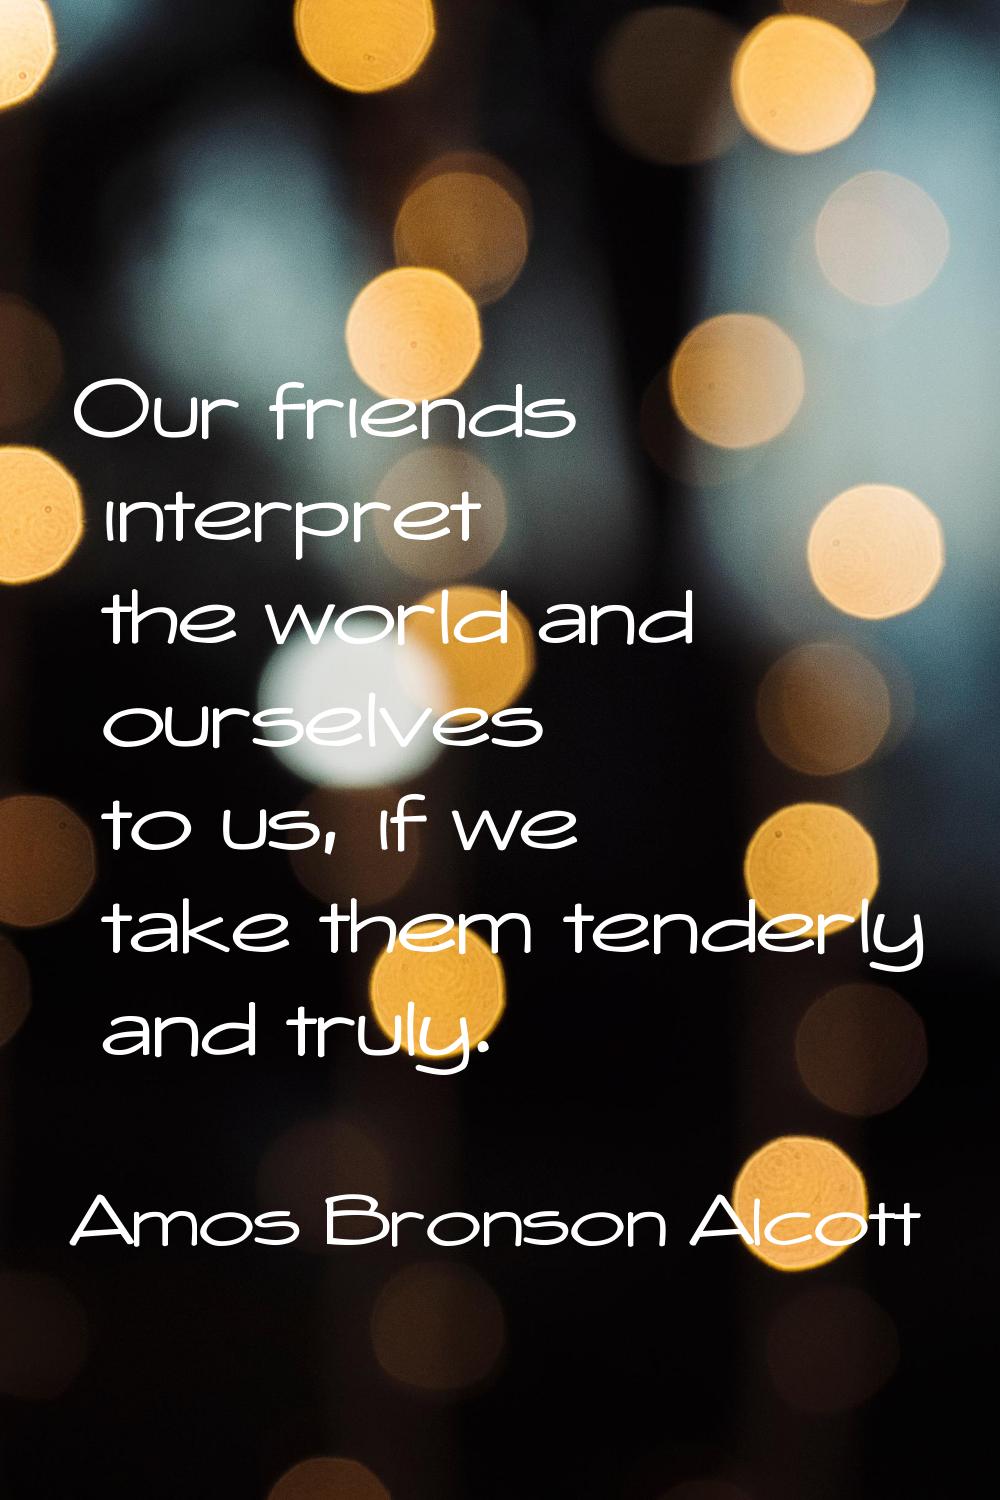 Our friends interpret the world and ourselves to us, if we take them tenderly and truly.